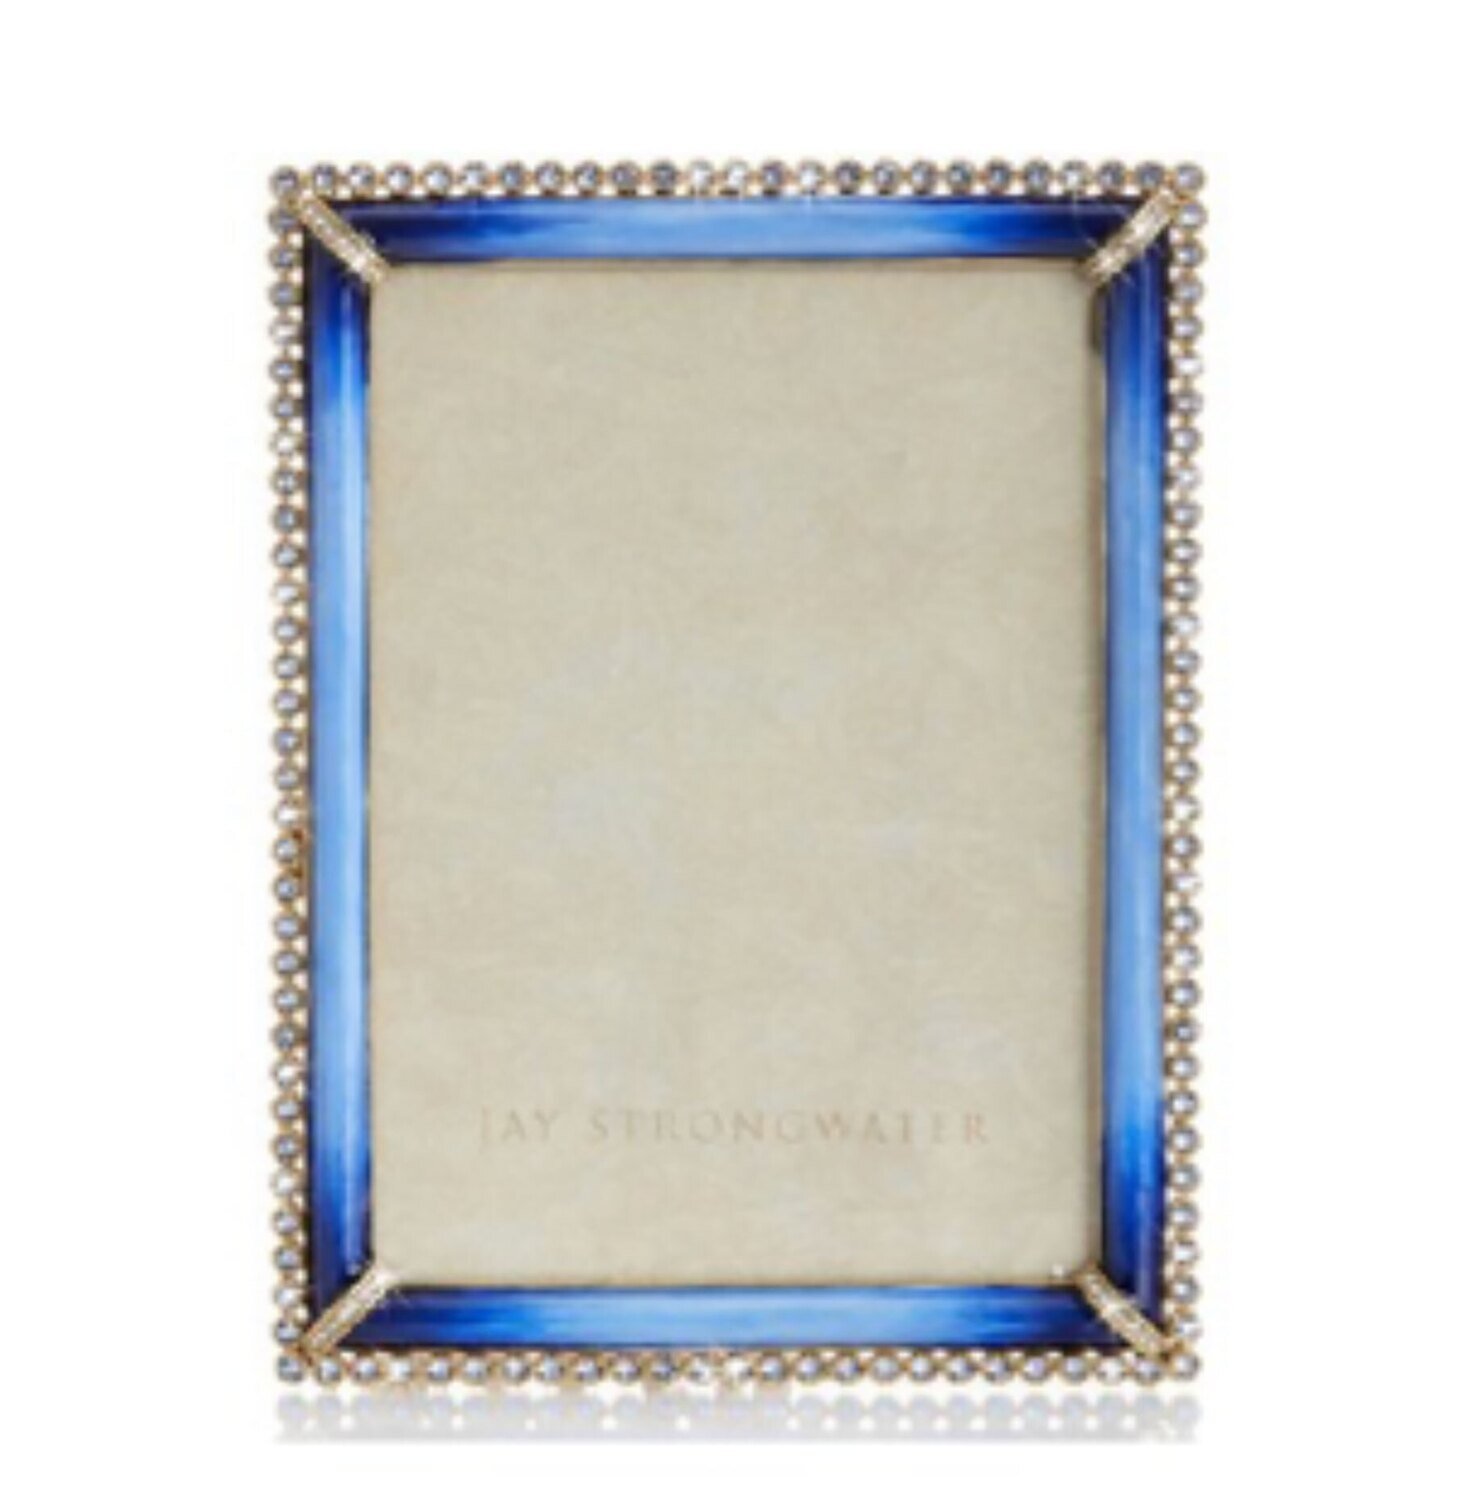 Jay Strongwater Stone Edge 5" x 7" Picture Frame SPF5511-261